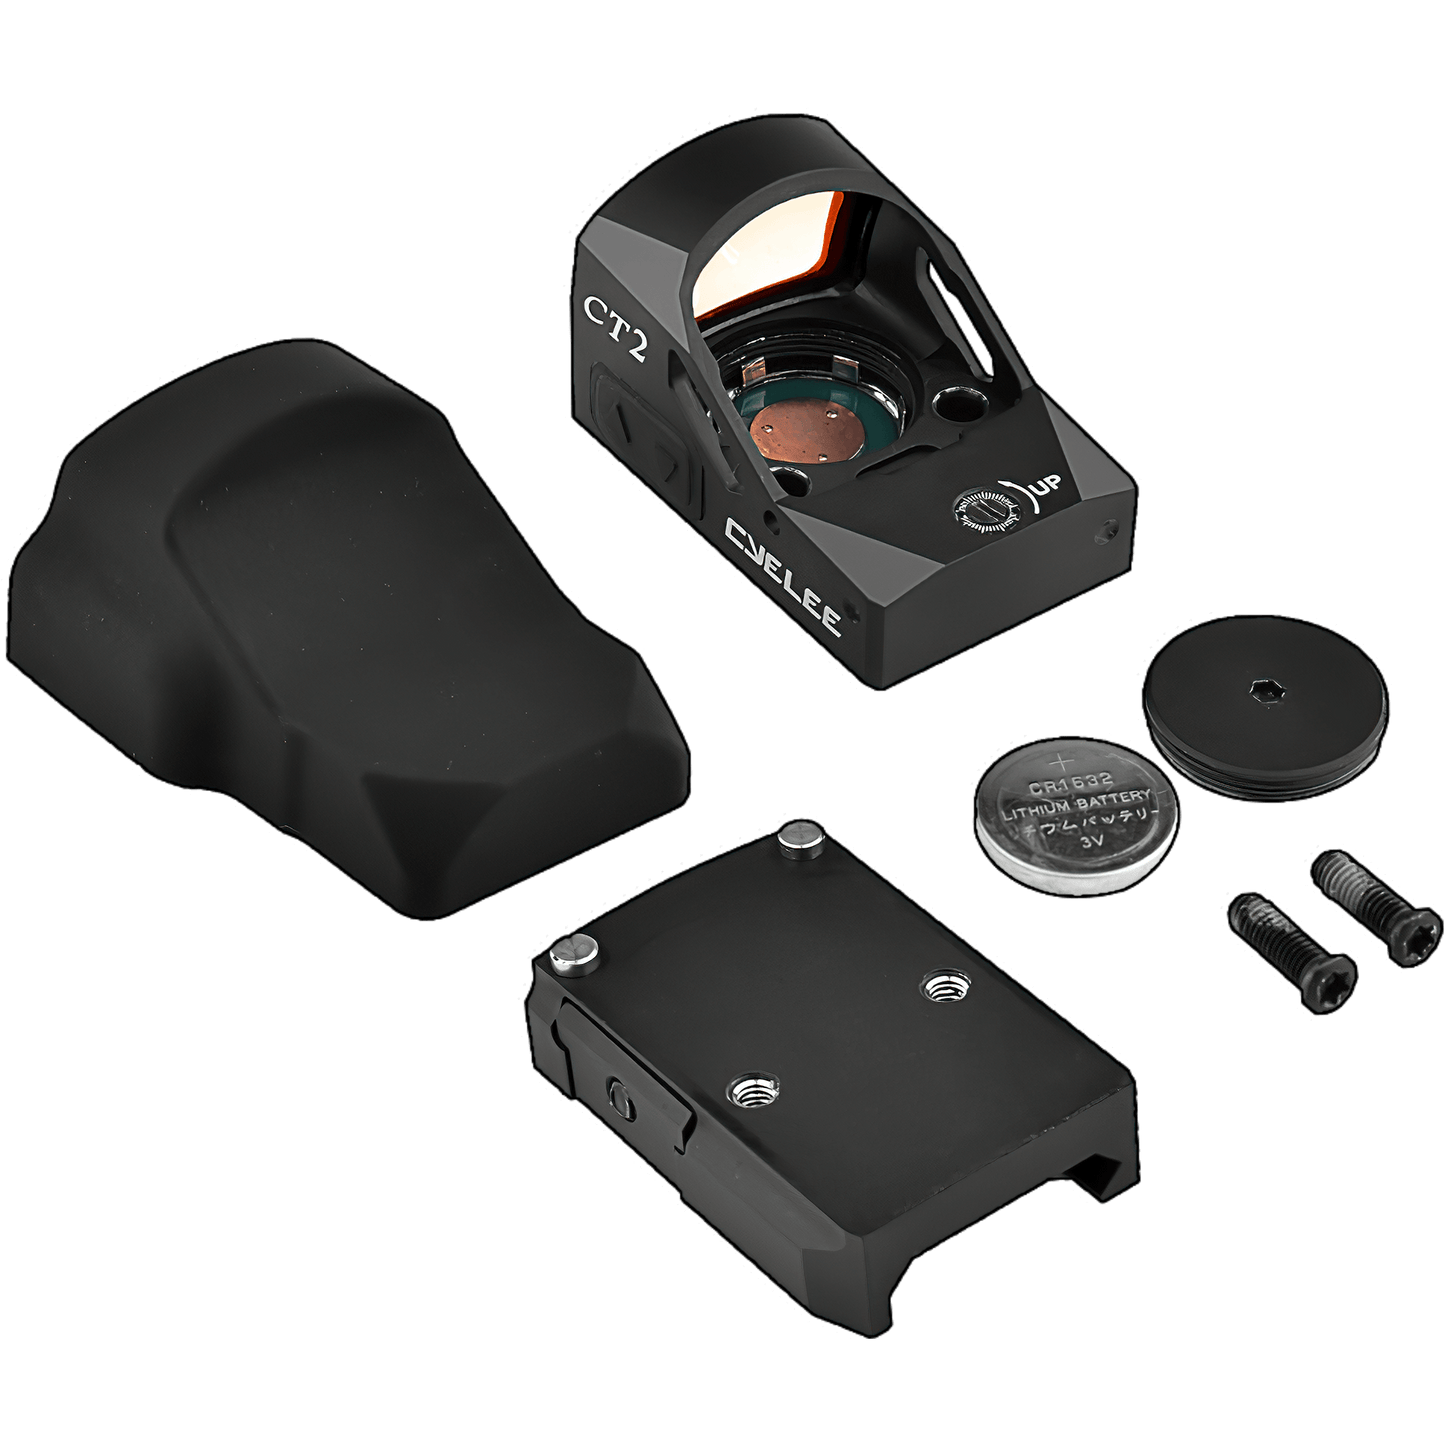 Cyelee CT2 Micro Pistol Red Dot Sight With Motion Deactivated Standby (RMR Footprint) 3 MOA